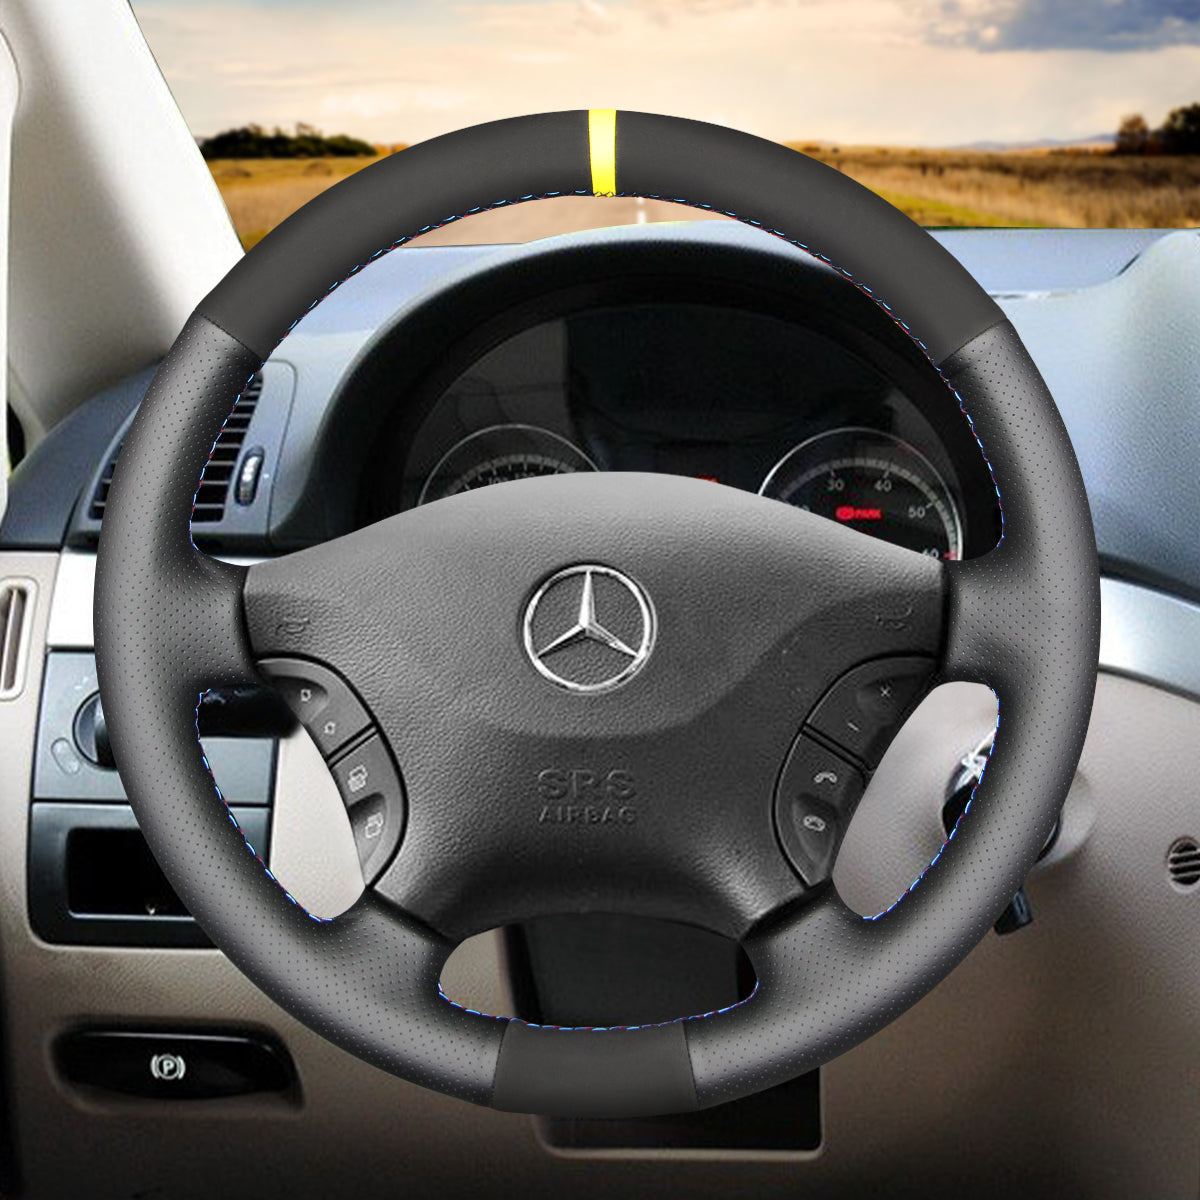 Does Mackel have a Louis Vuitton steering wheel cover? : r